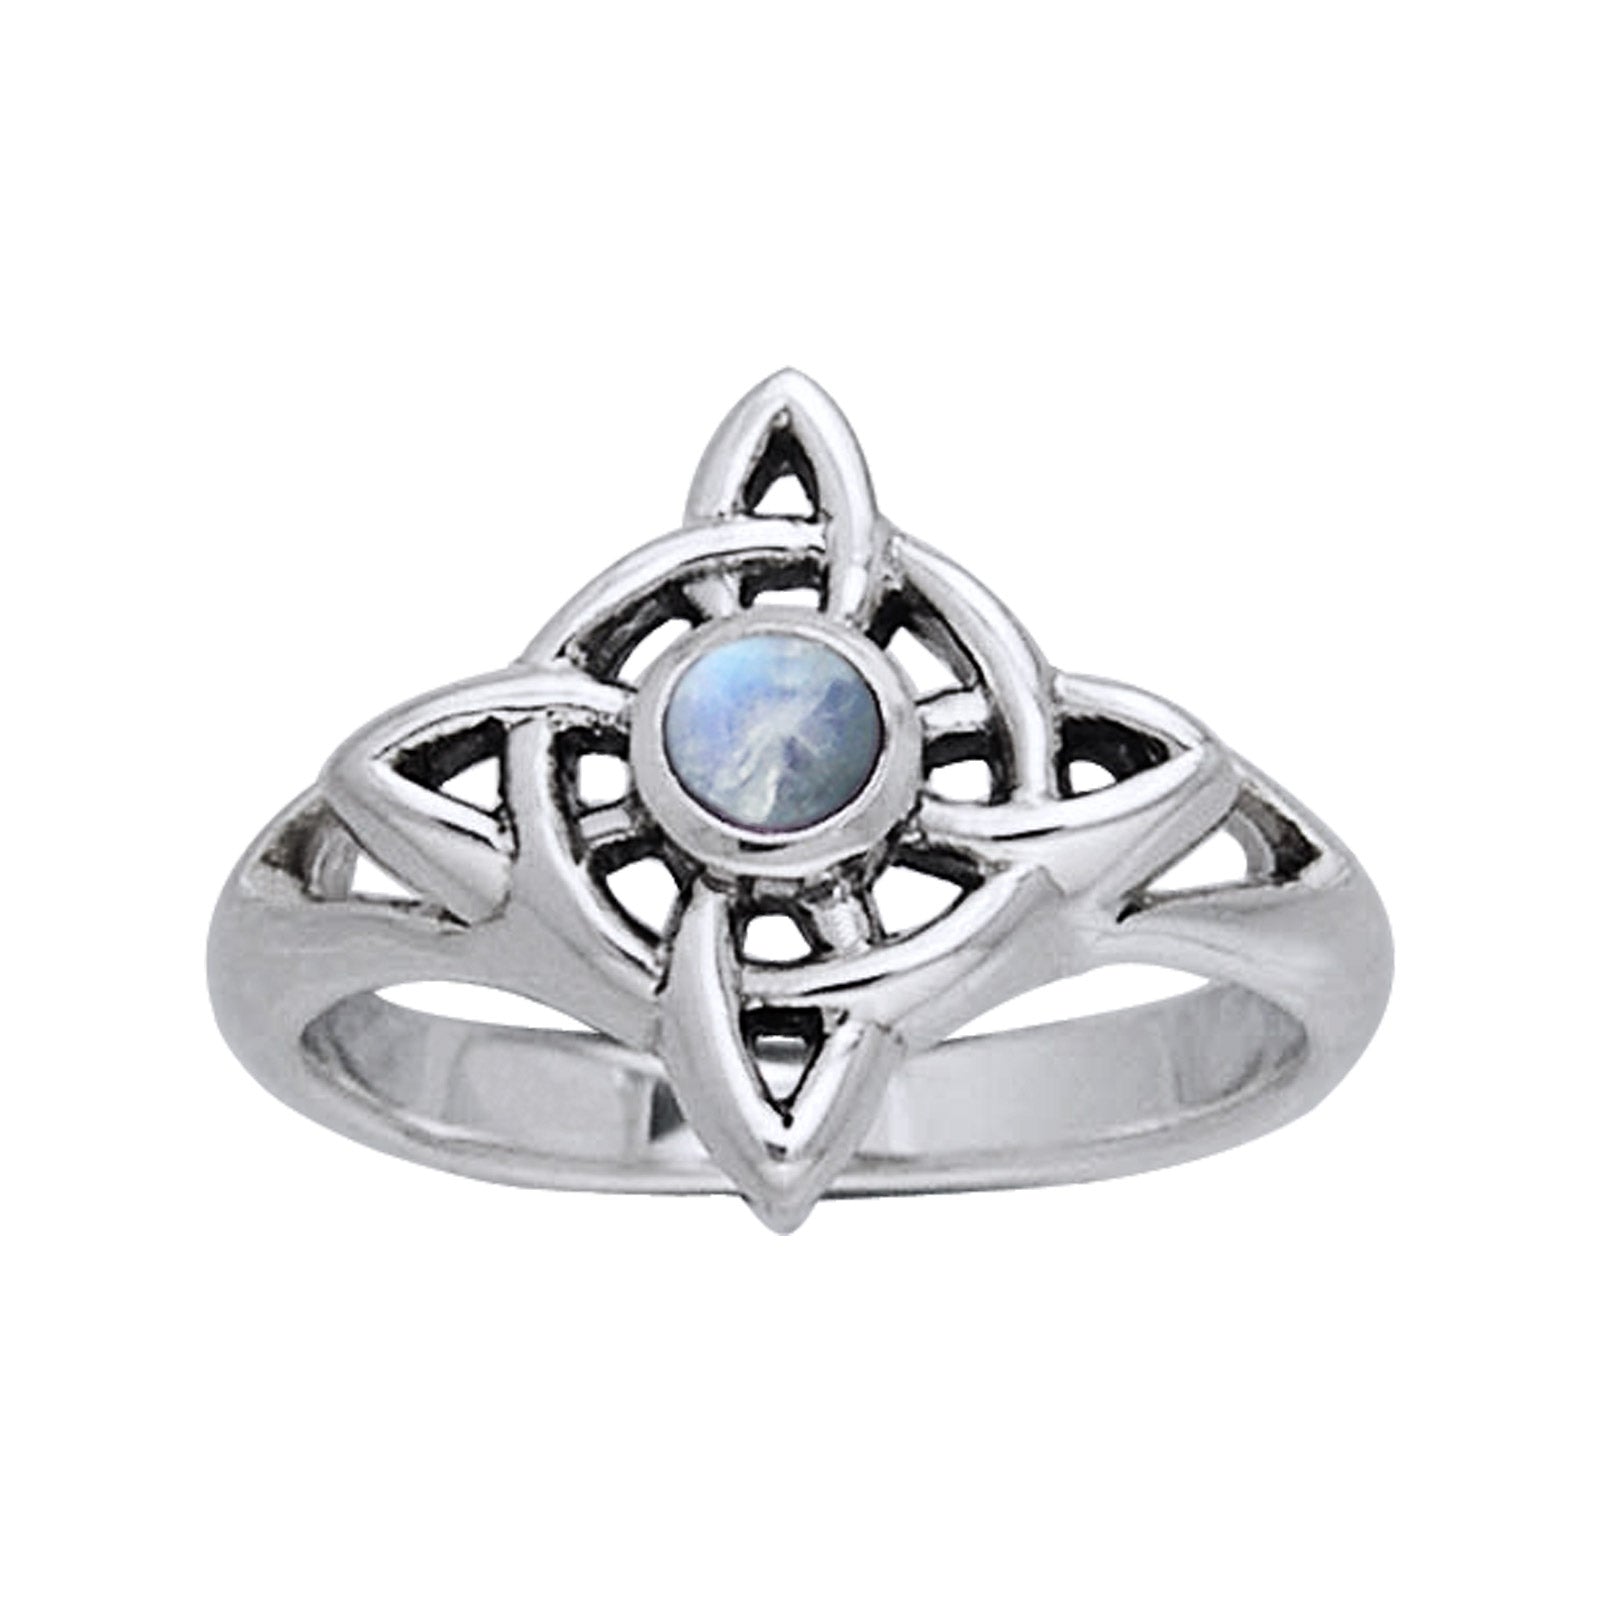 Rainbow Moonstone - North Star Celtic Knot Sterling Silver Ring - Silver Insanity